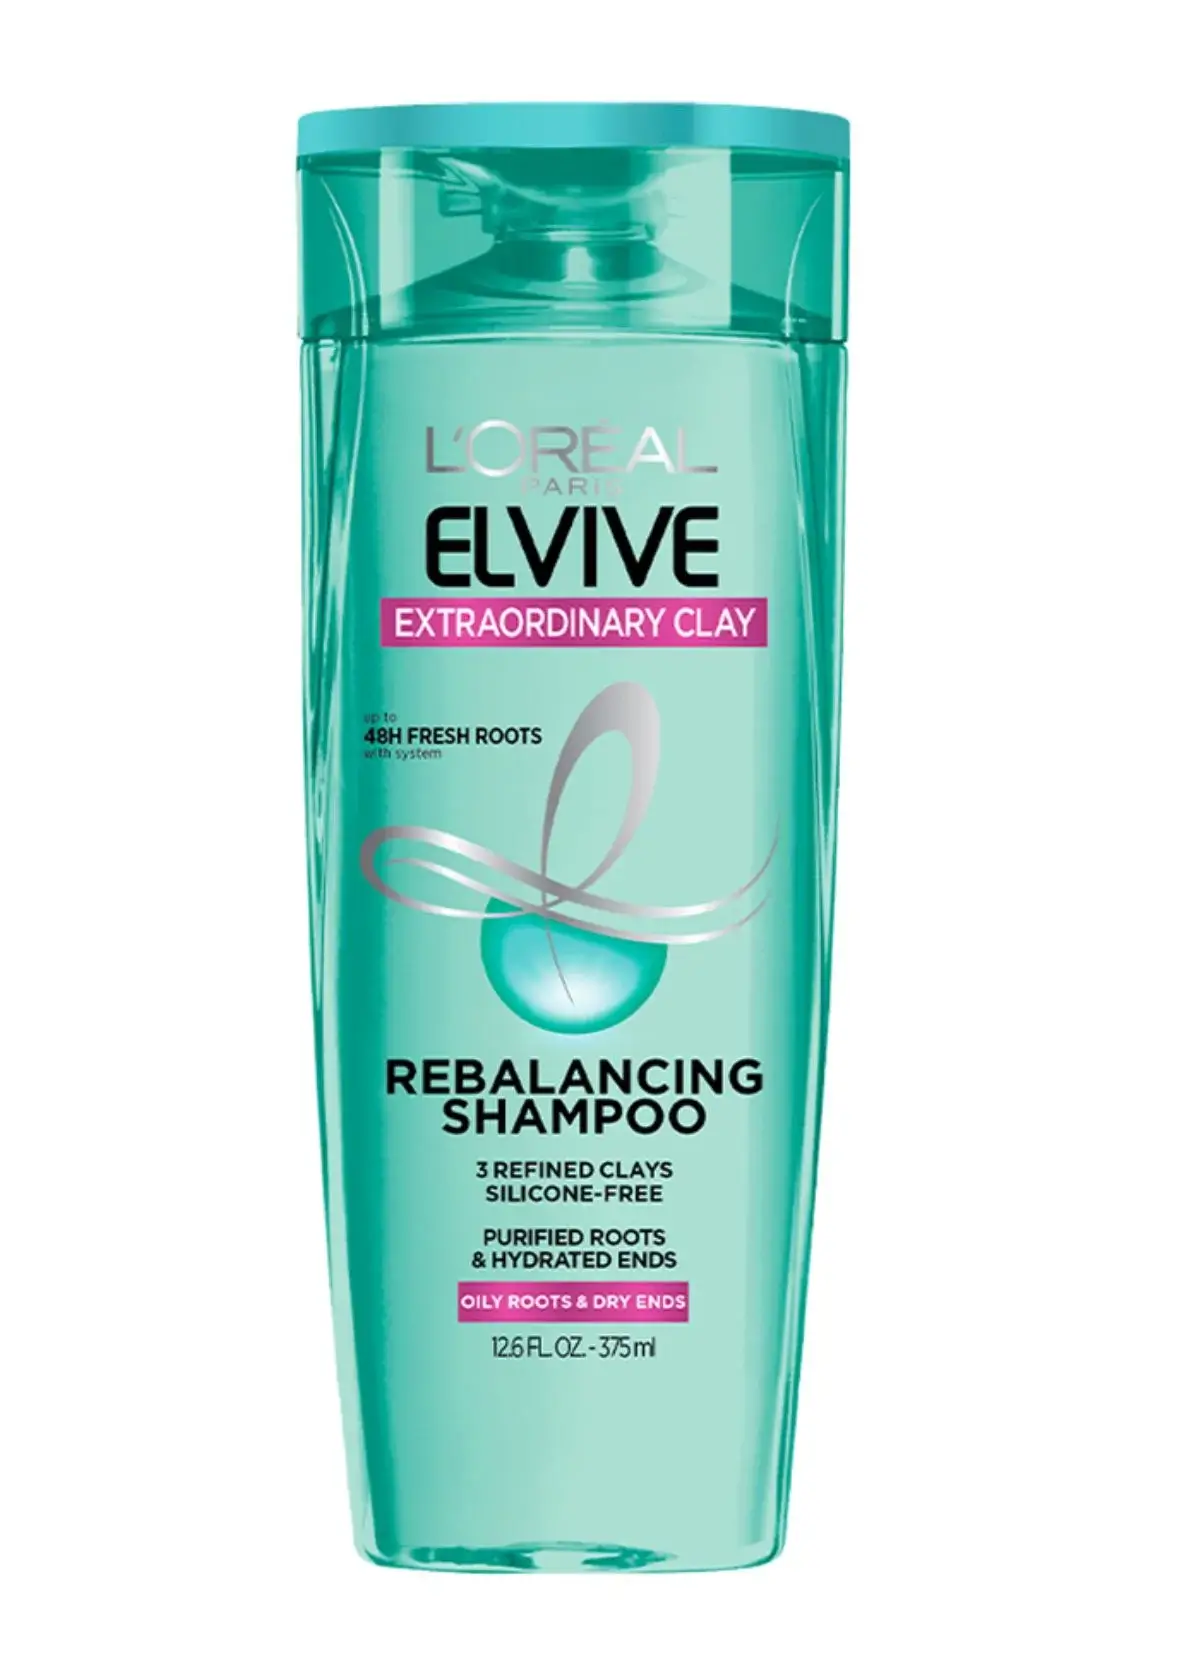 How does a good shampoo work to eliminate smell from hair?